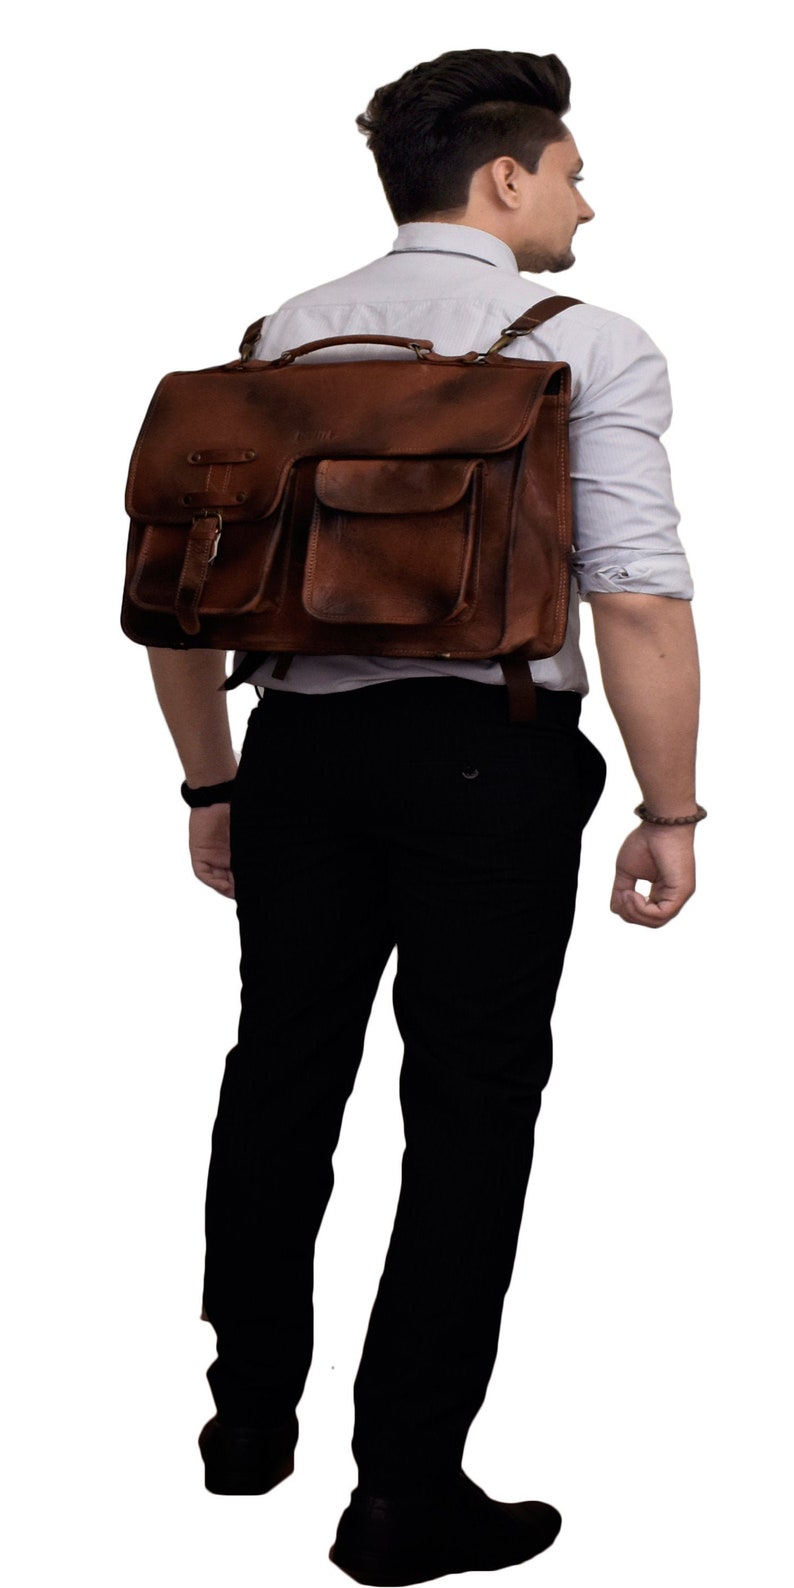 Backpack Feature Upgrade to messenger bag, Personalized, Leather Backpack Bag with Handle by Aldesaka image 1